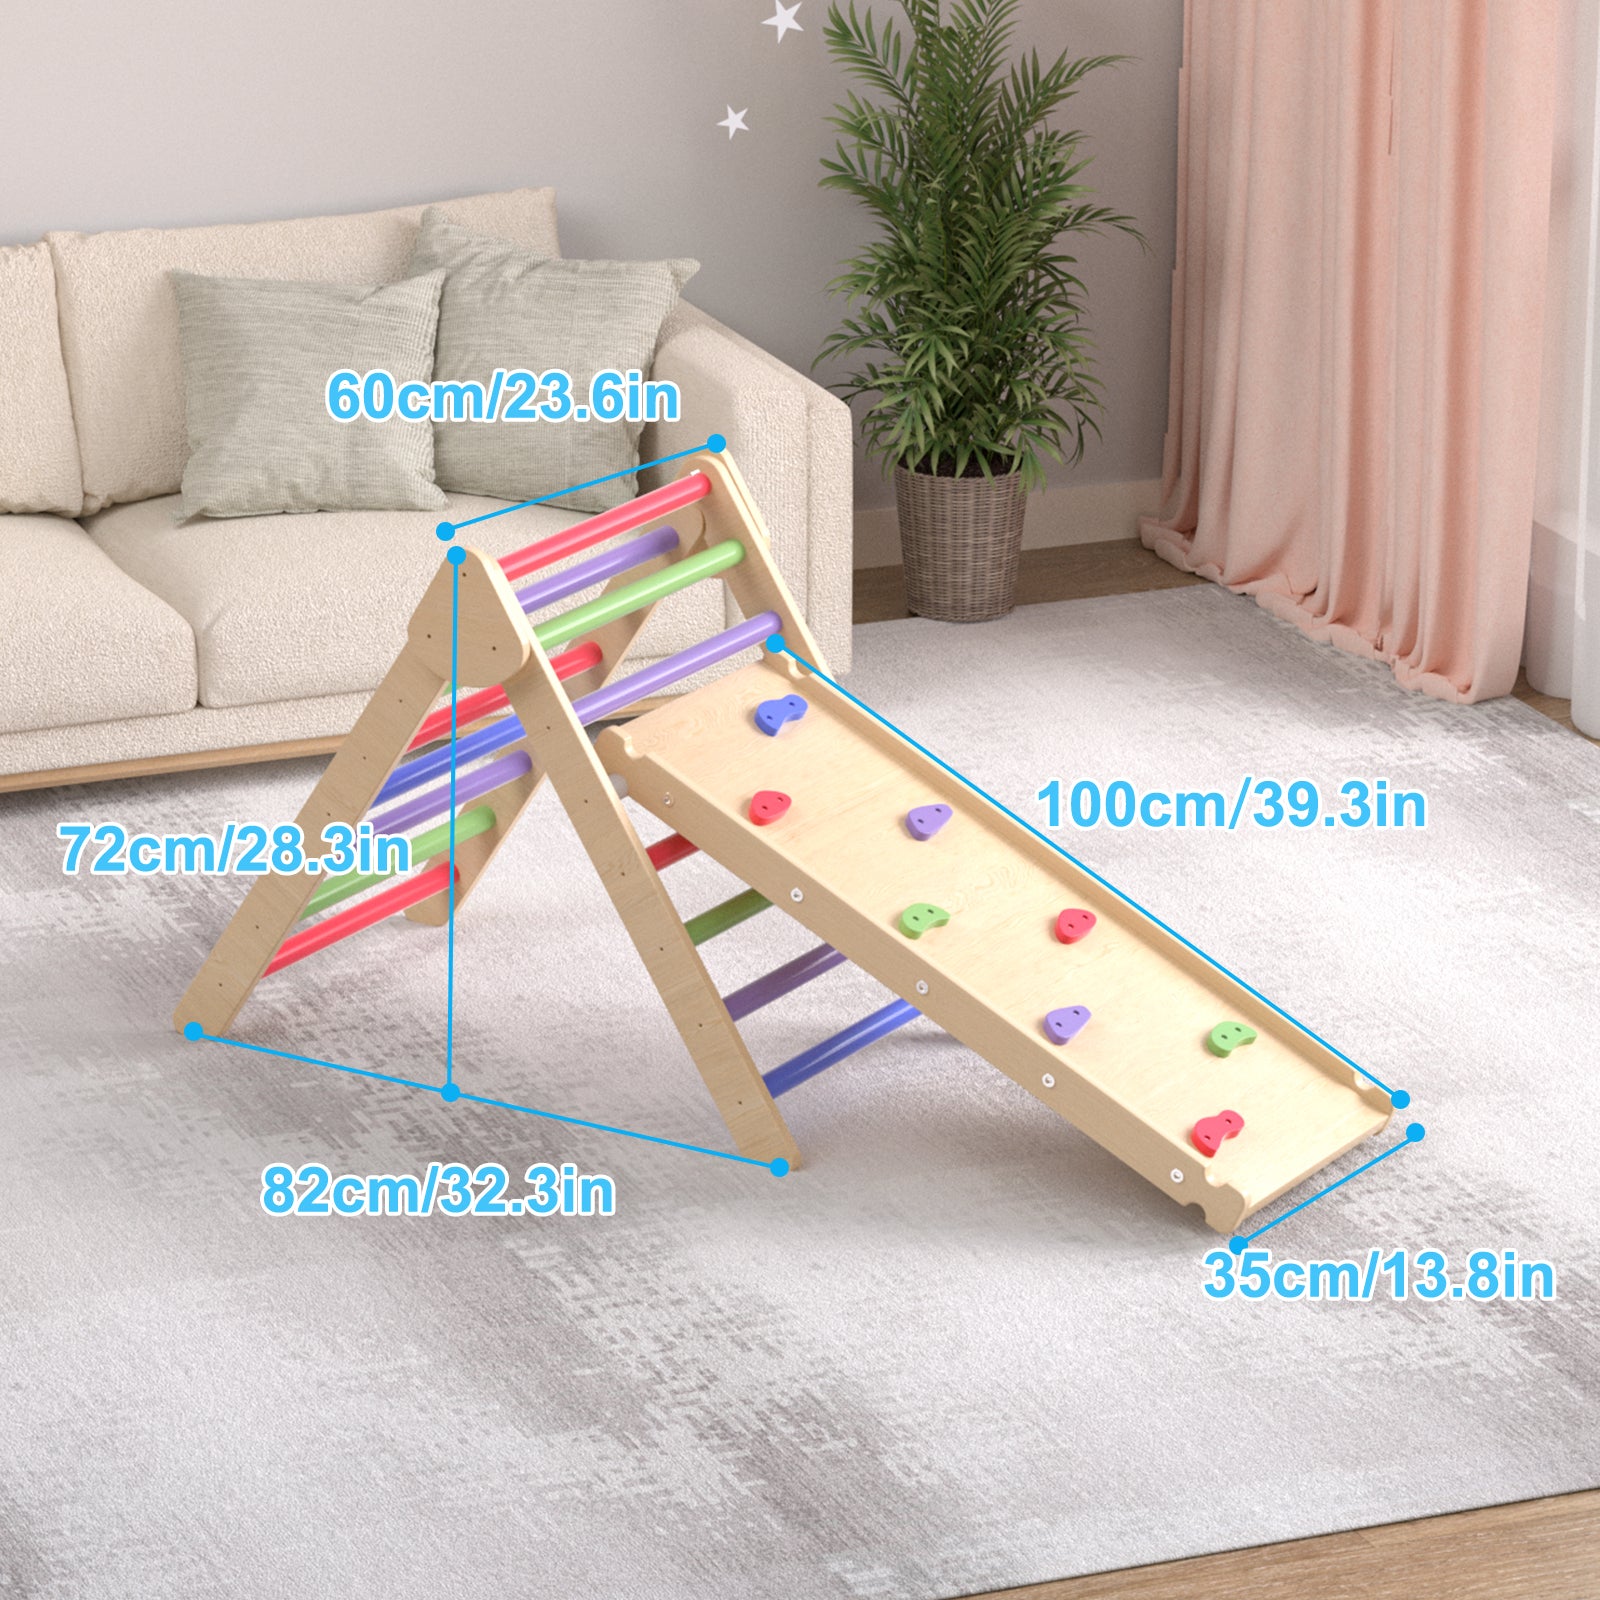 XJD 4 in 1 Wood Climber Play Set Colorful In Stock USA